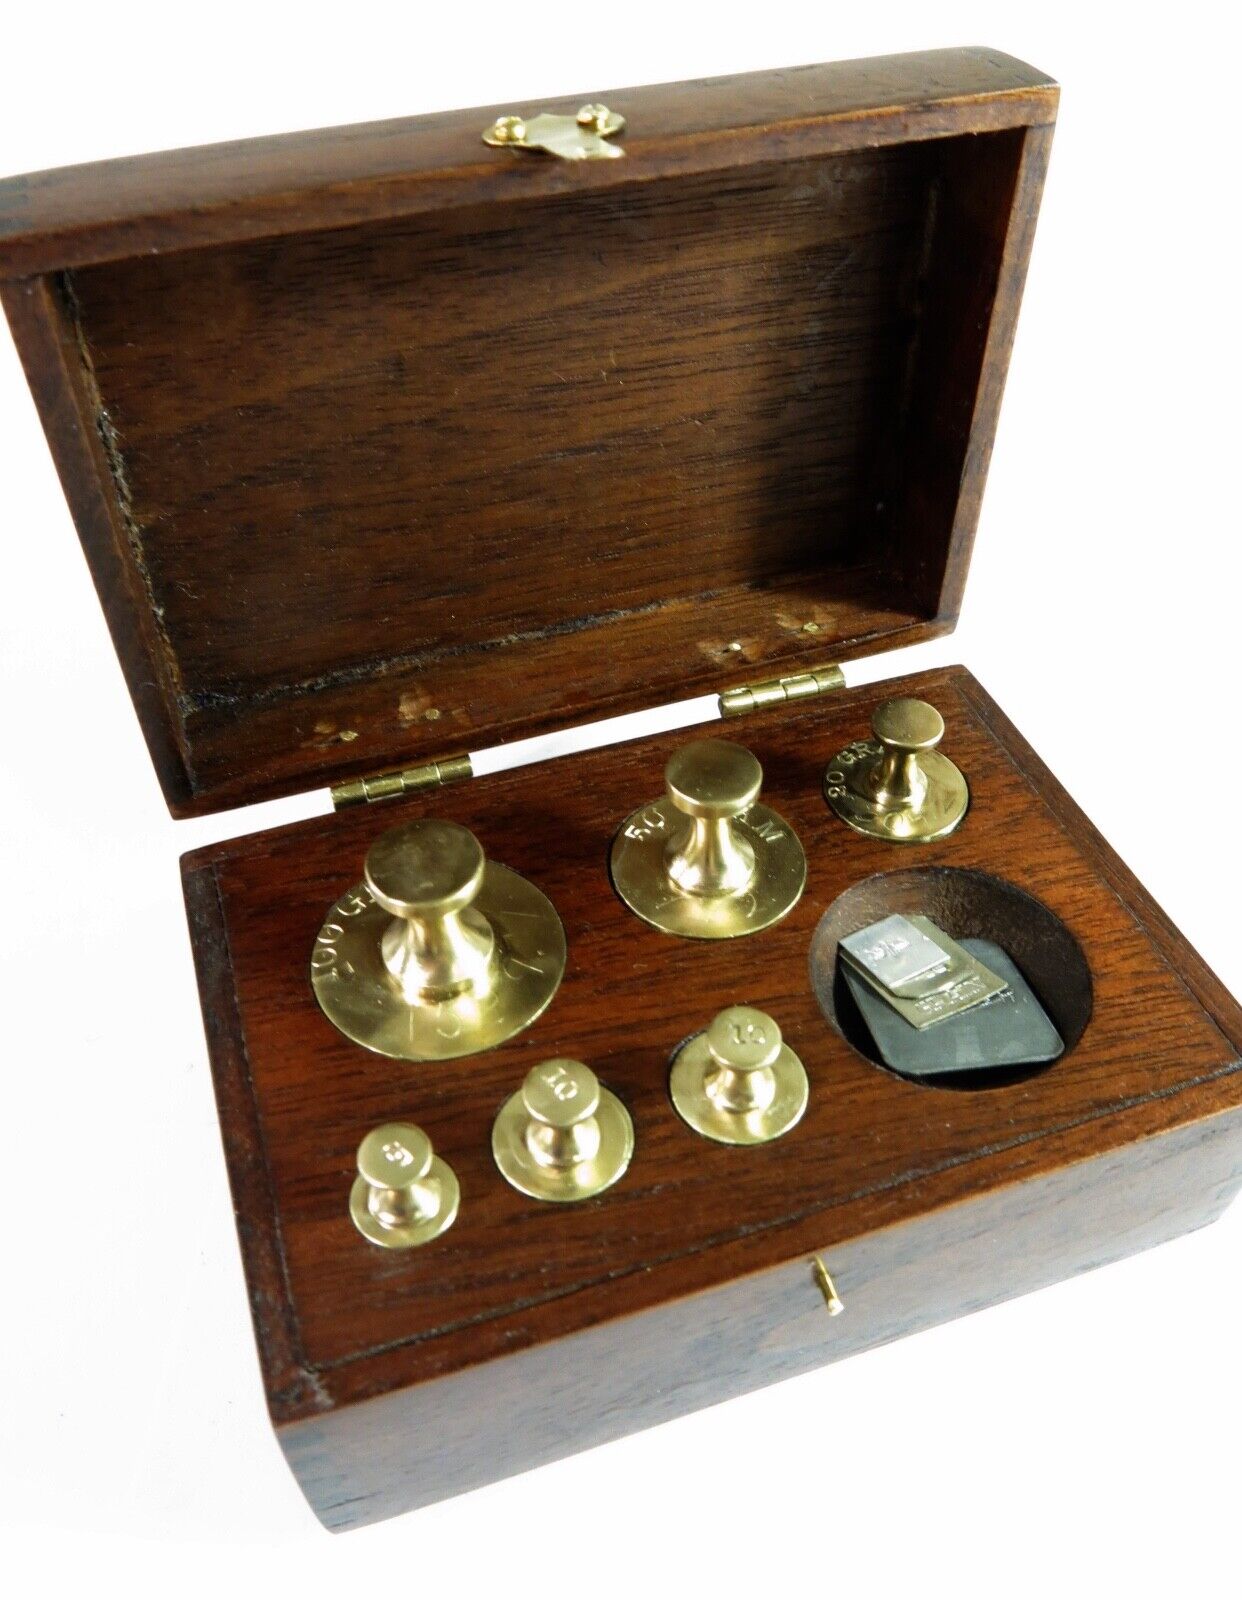 Antique Early 1900s Complete Metric Weight set in Refinished Mahogany Box.